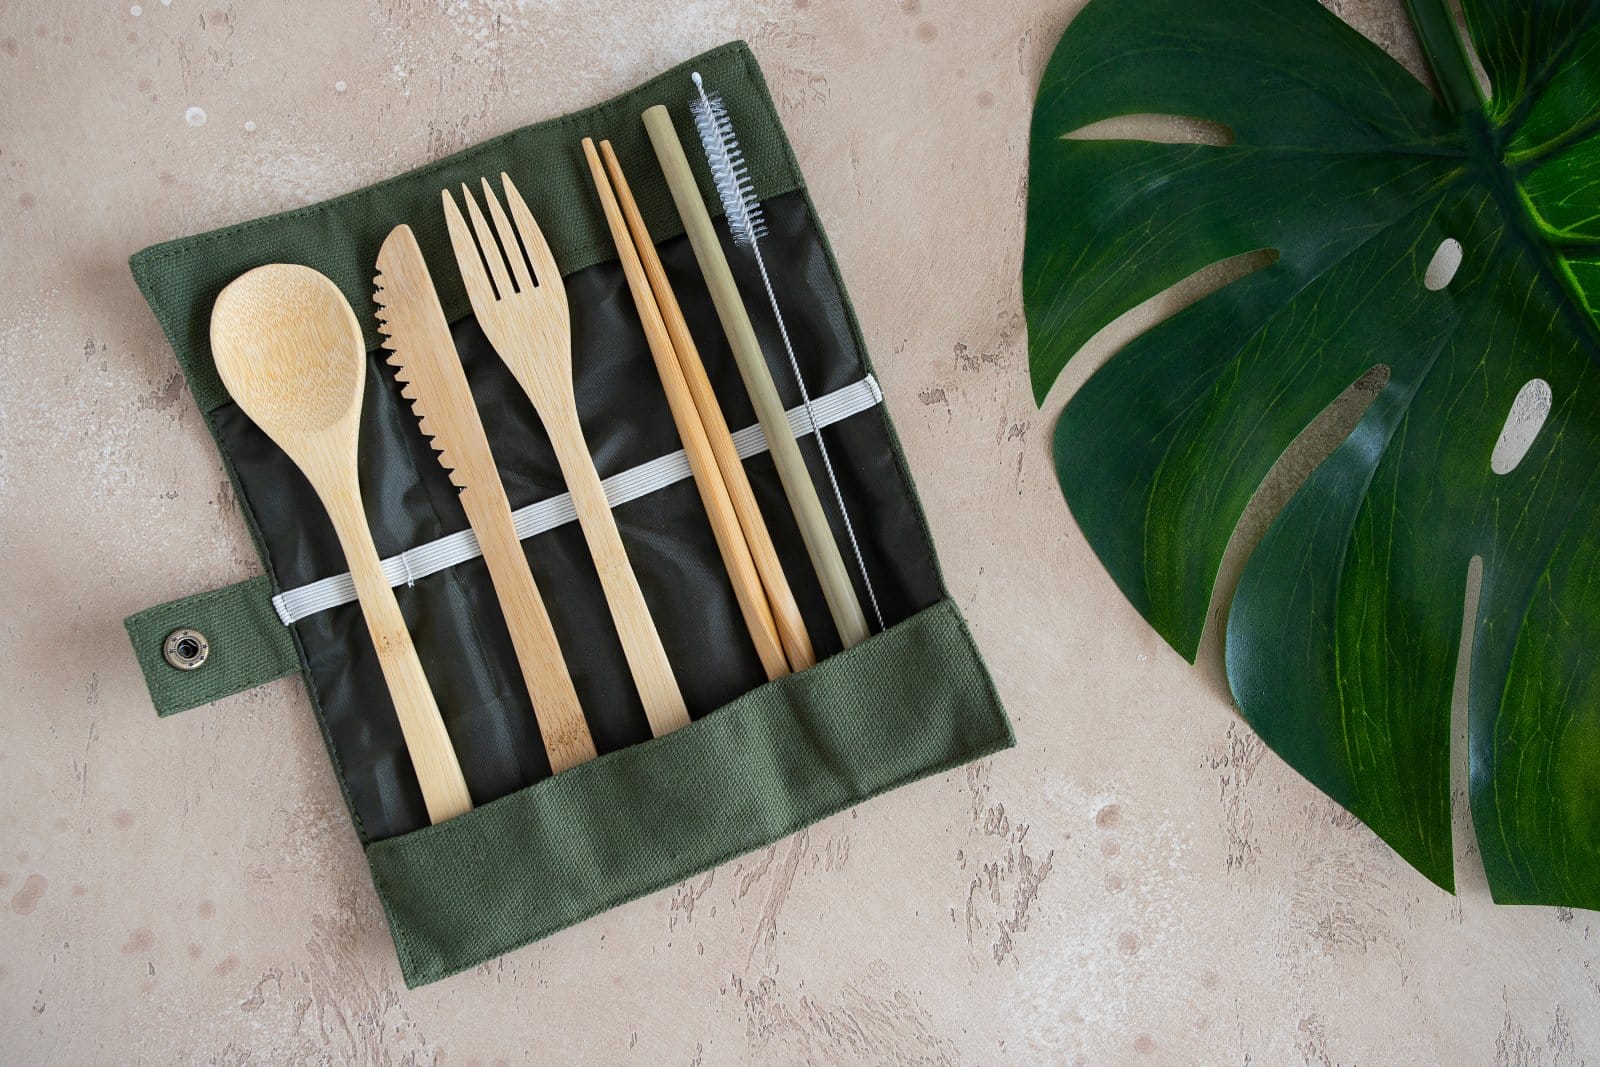 <p><span>Carrying a set of reusable utensils and straws can significantly cut down on plastic waste during your travels. These sets often include a knife, fork, spoon, and straw made from sustainable materials like bamboo, stainless steel, or silicone.</span></p> <p><span>Compact and lightweight, they fit easily into your daypack or luggage, ensuring you’re prepared for meals on the go. Using reusable utensils is a simple yet effective way to reduce your reliance on single-use plastics, a major contributor to environmental pollution.</span></p> <p><b>Insider’s Tip: </b><span>Choose a set that comes in a travel-friendly case or pouch for convenience and hygiene.</span></p>